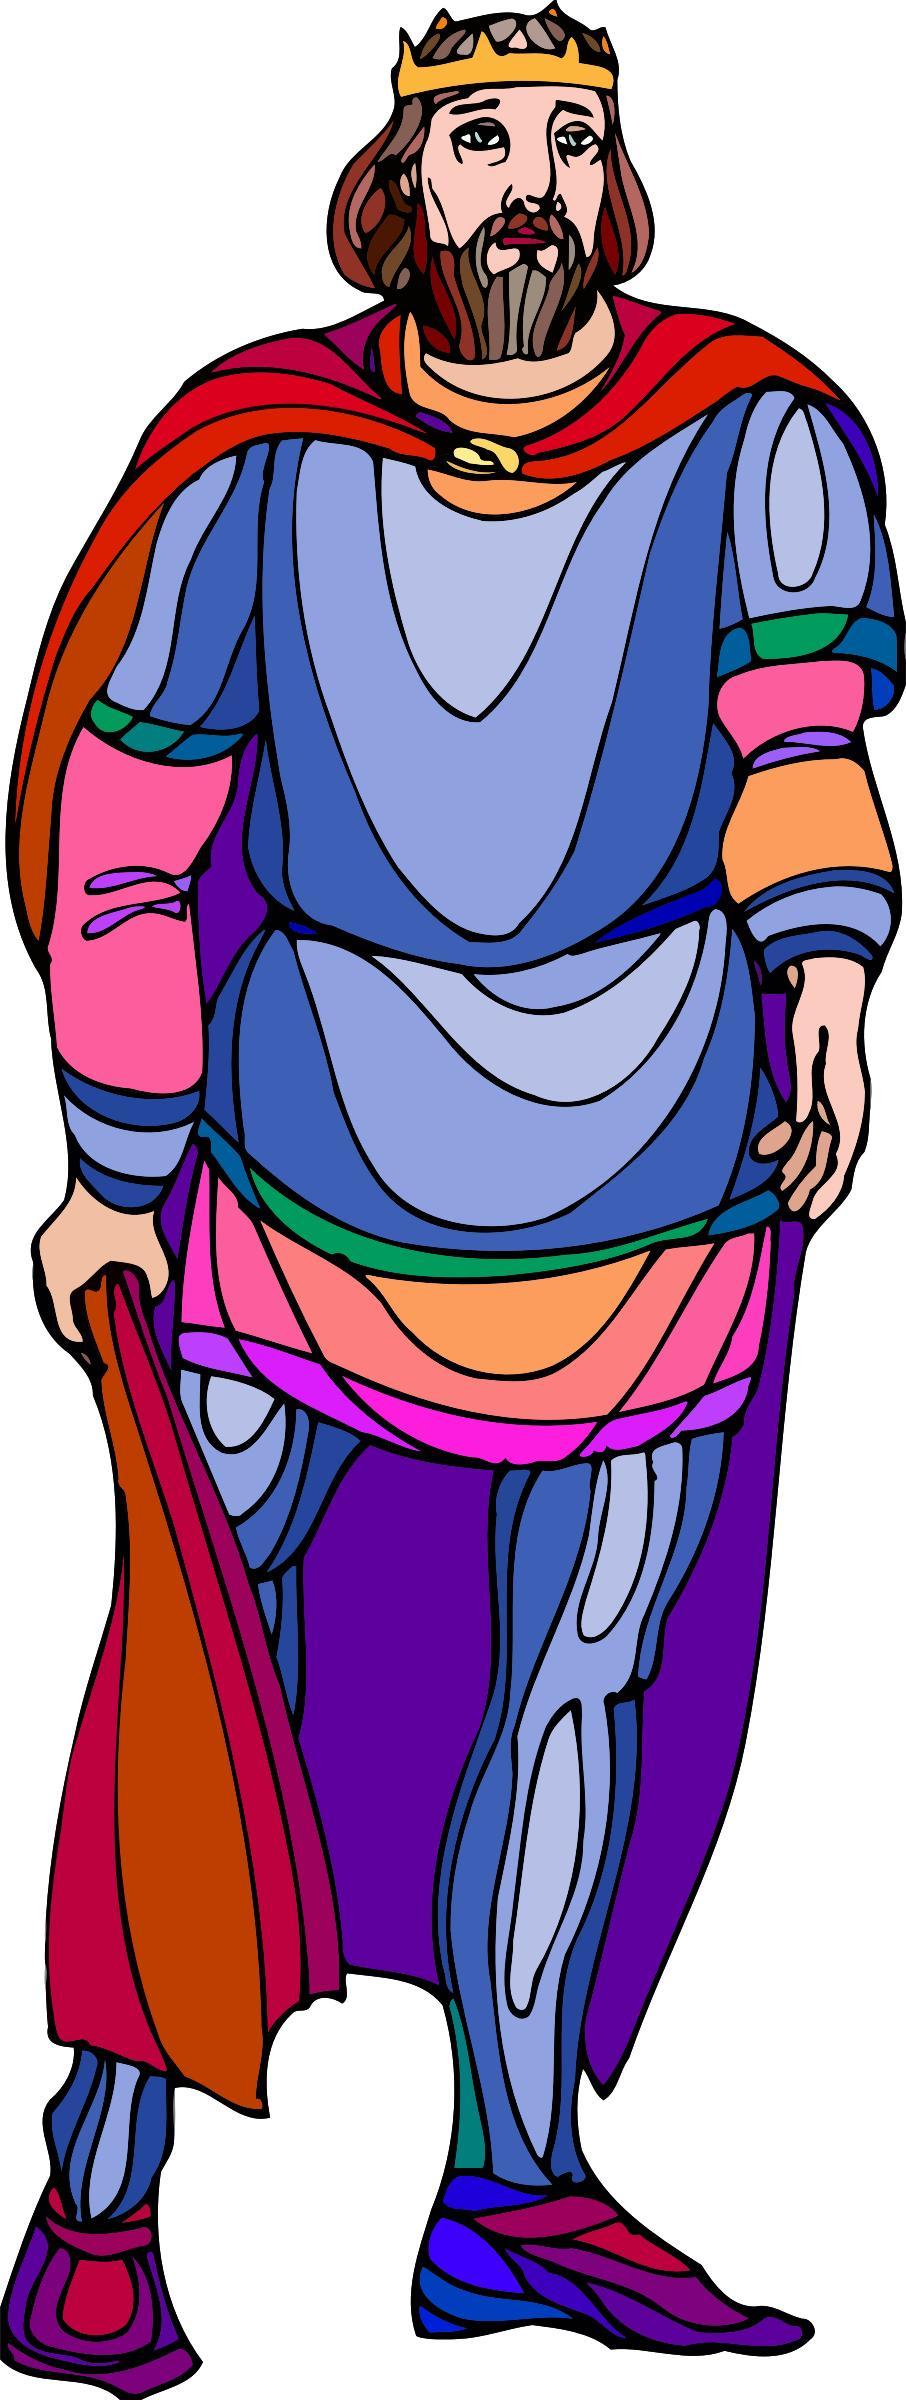 Shakespeare characters - French king (colour) png transparent